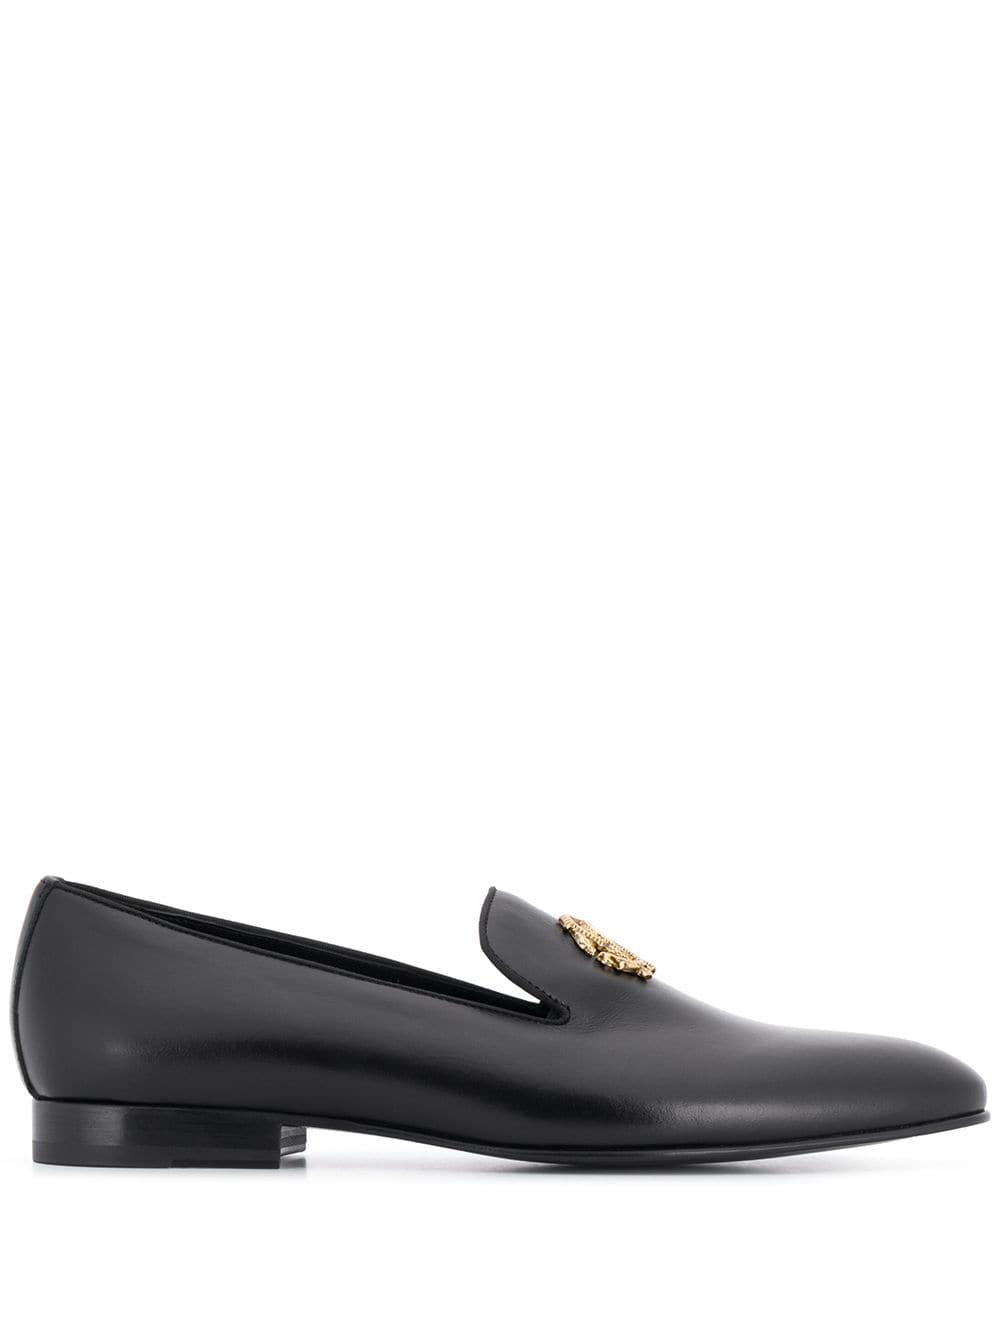 Roberto Cavalli Leather Gold-tone Logo Loafers in Black for Men | Lyst